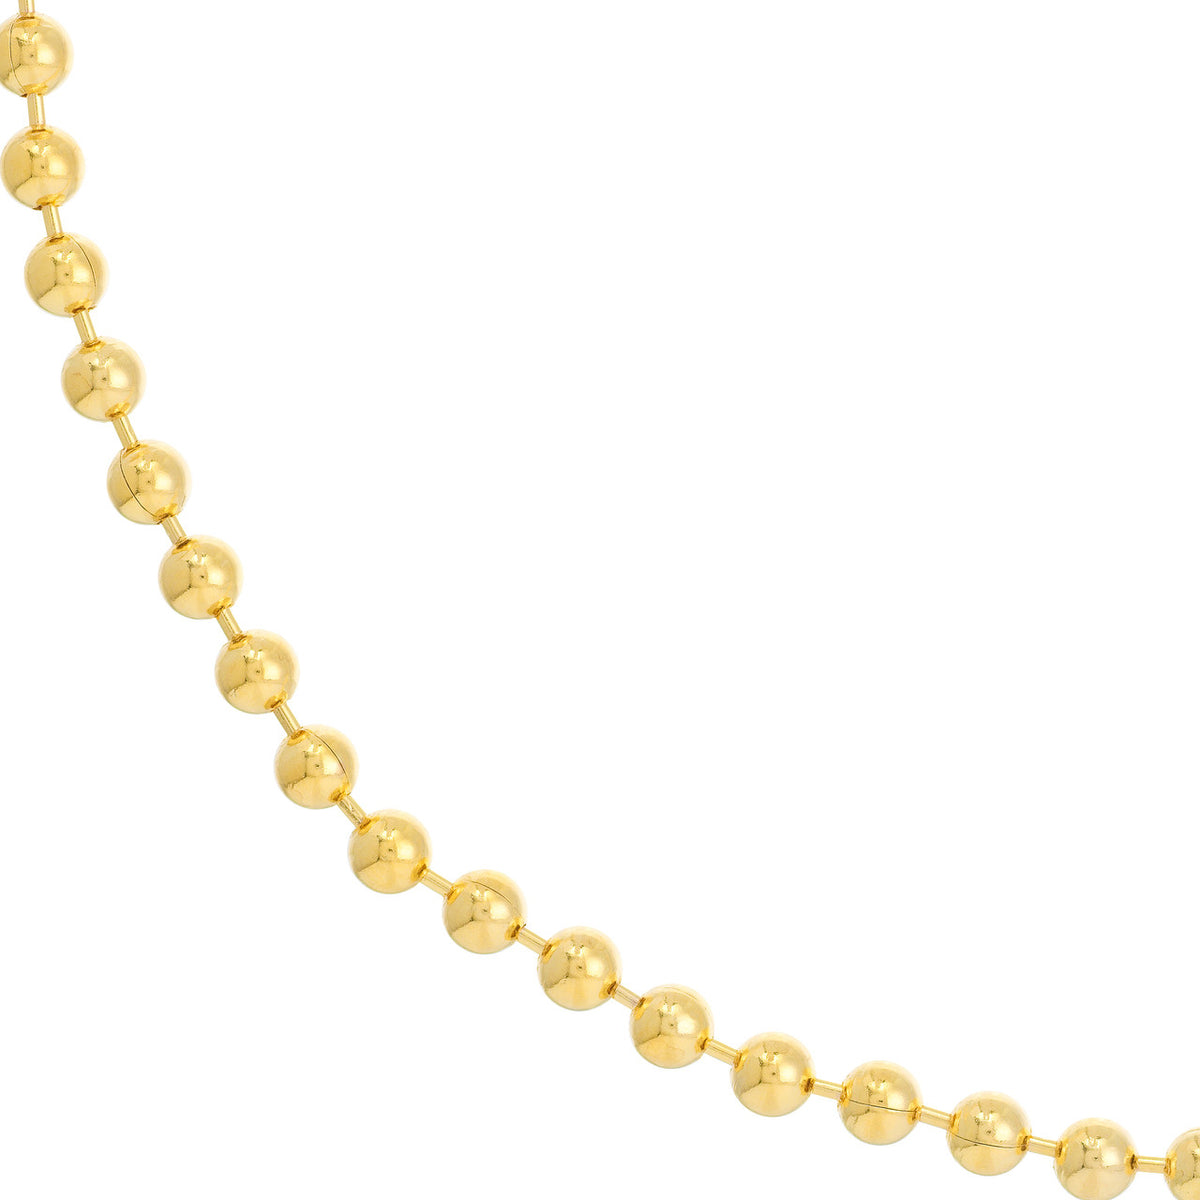 14k Yellow Gold 4mm Bead Chain Necklace with Lobster Lock